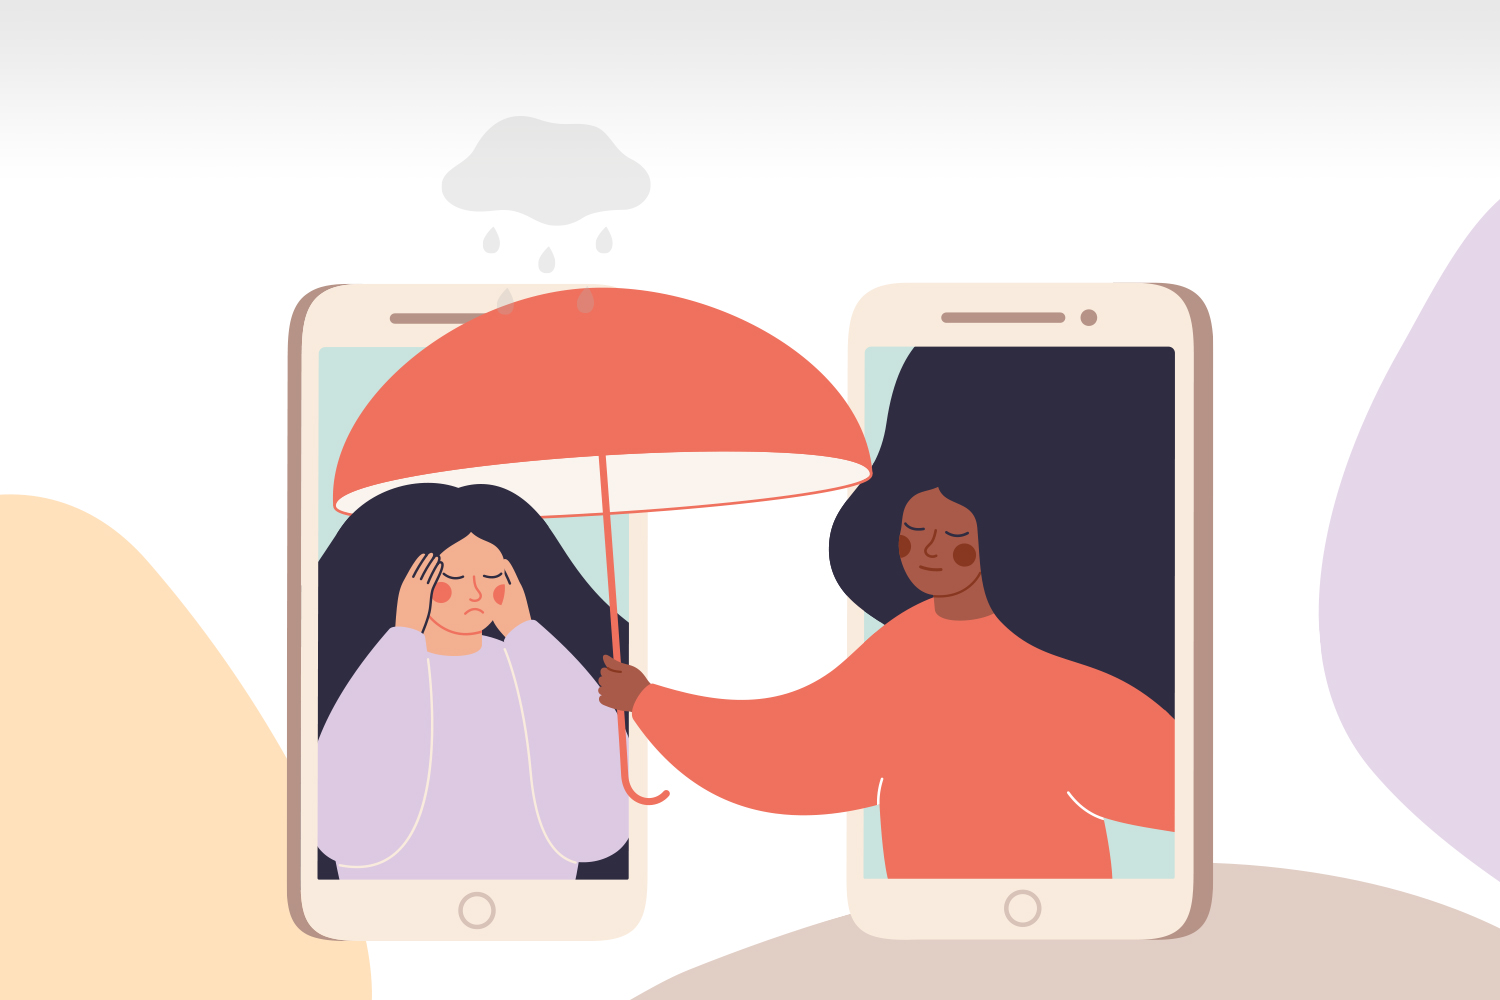 Illustration of two people, each inside of a smartphone, one is upset and the other is handing her an umbrellaIllustration of two people, each inside of a smartphone, one is upset and the other is handing her an umbrella